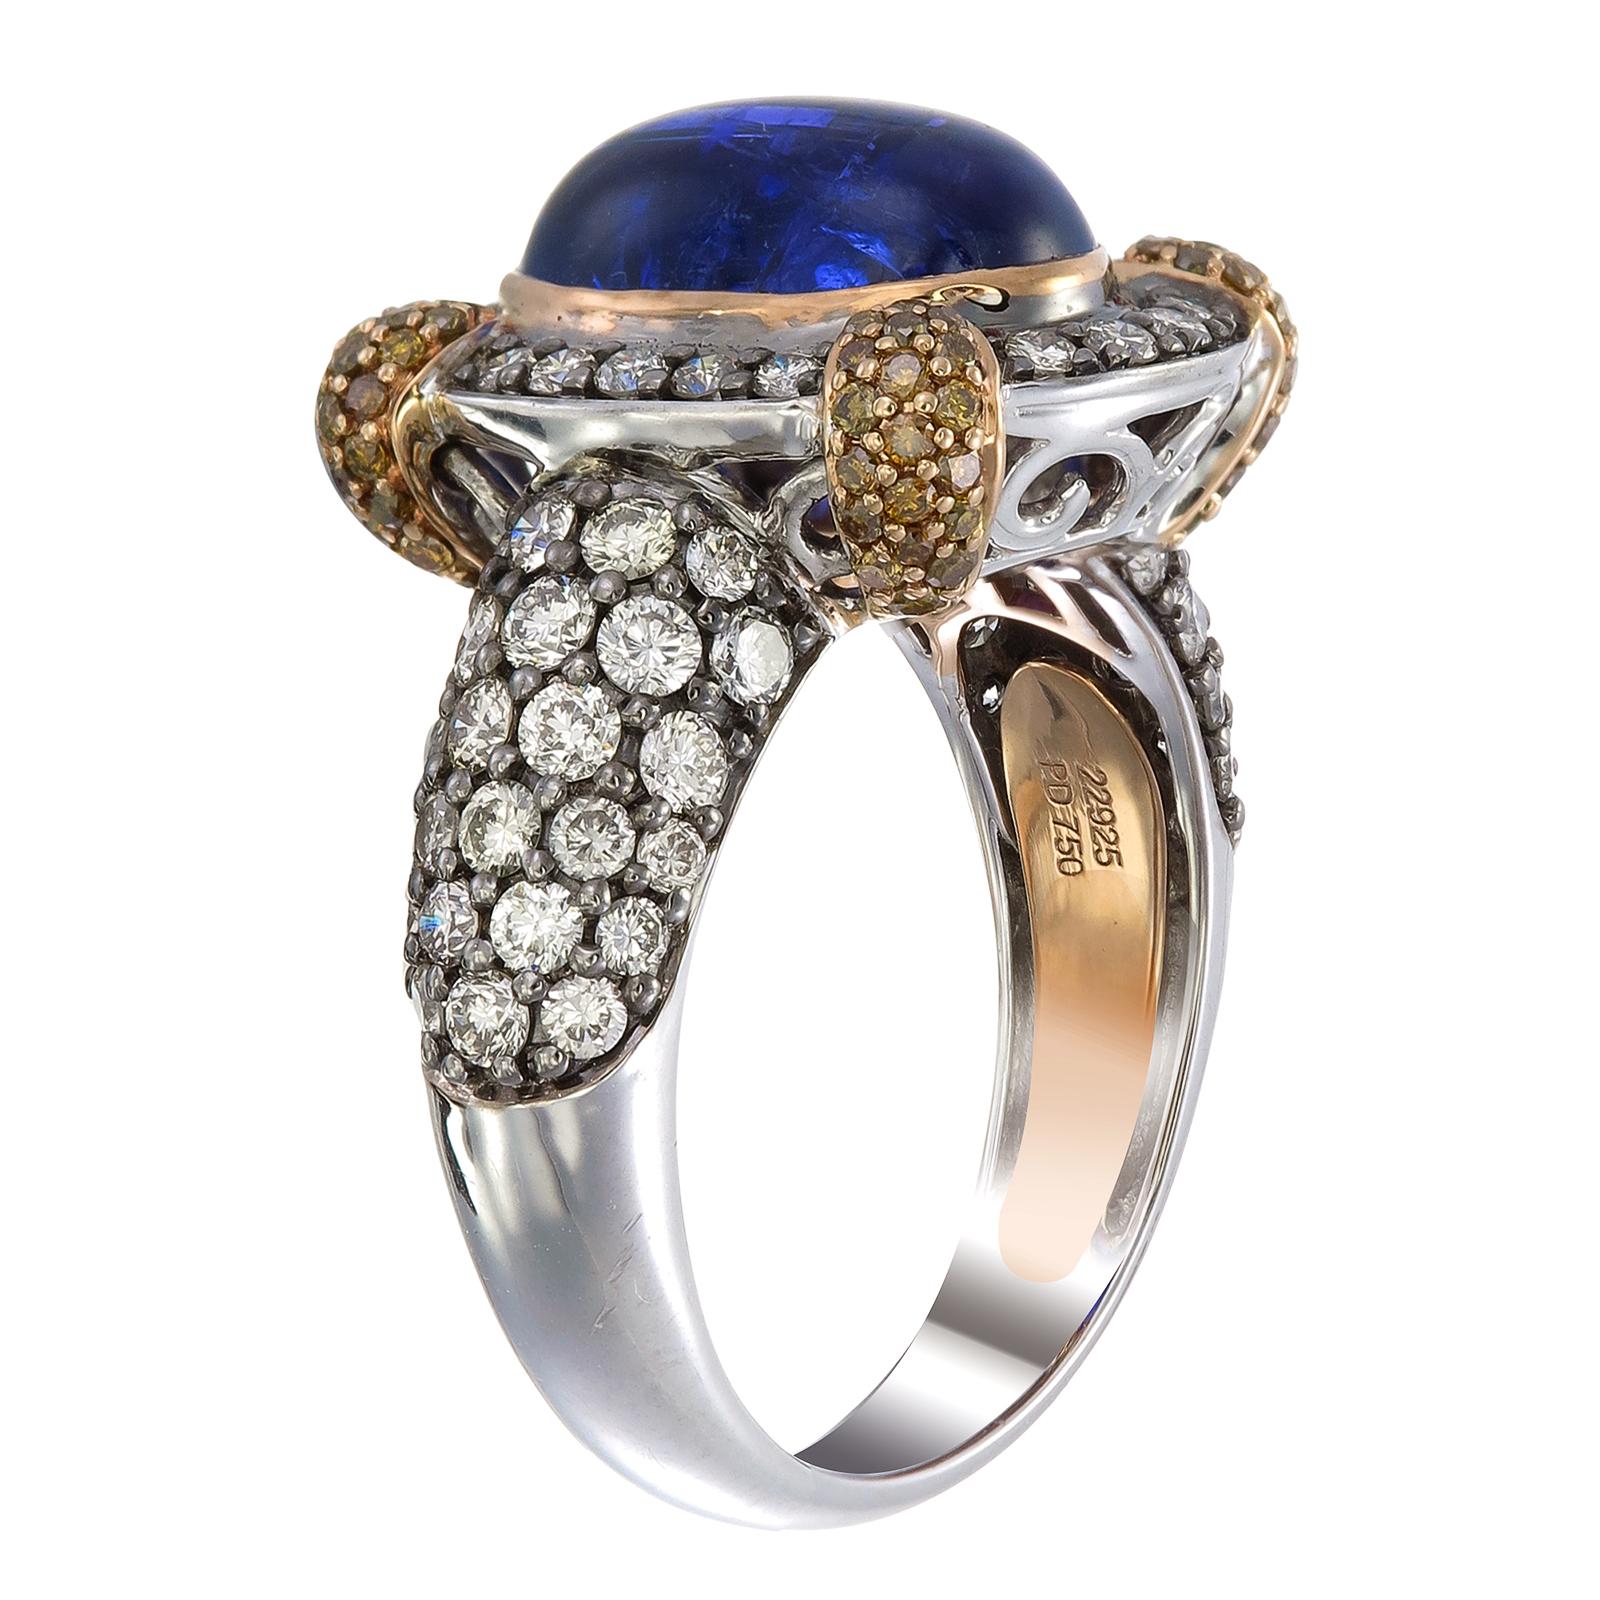 On a throne of Gold and diamonds sits a 6.81-carat blue Tanzanite kept secure by prongs paved in 0.47-carat Fancy colored Diamonds. The shoulder and shank of the Palladium and 18K Gold ring is studded with 1.75-carat of round Diamonds. An adjustable